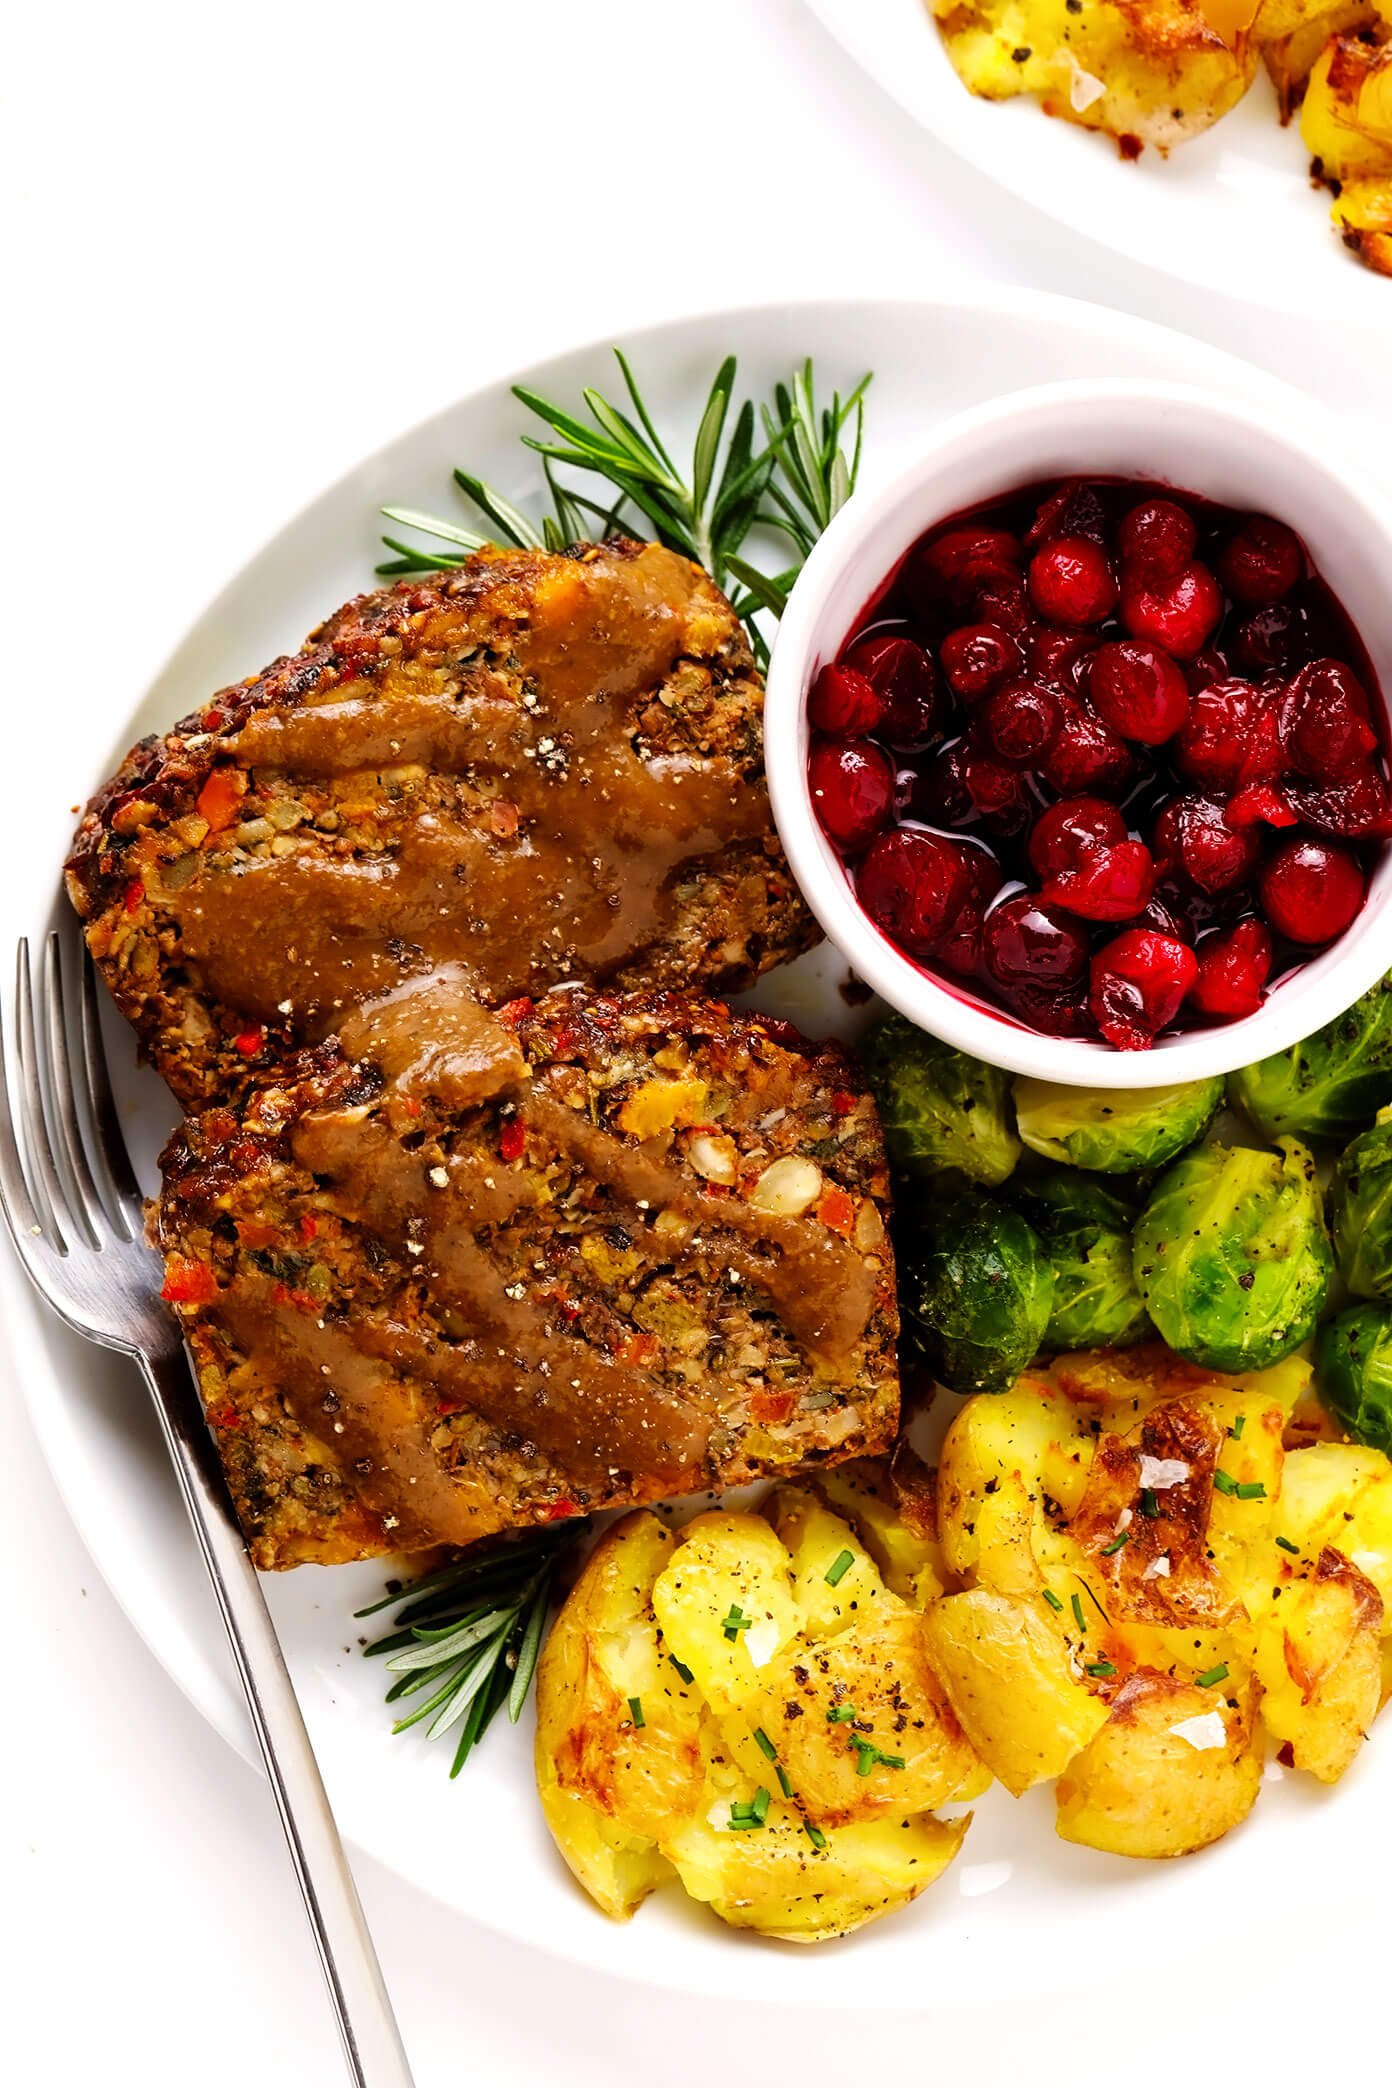 Nut Roast with Gravy, Smashed Potatoes, Roasted Brussels Sprouts and Cranberry Sauce